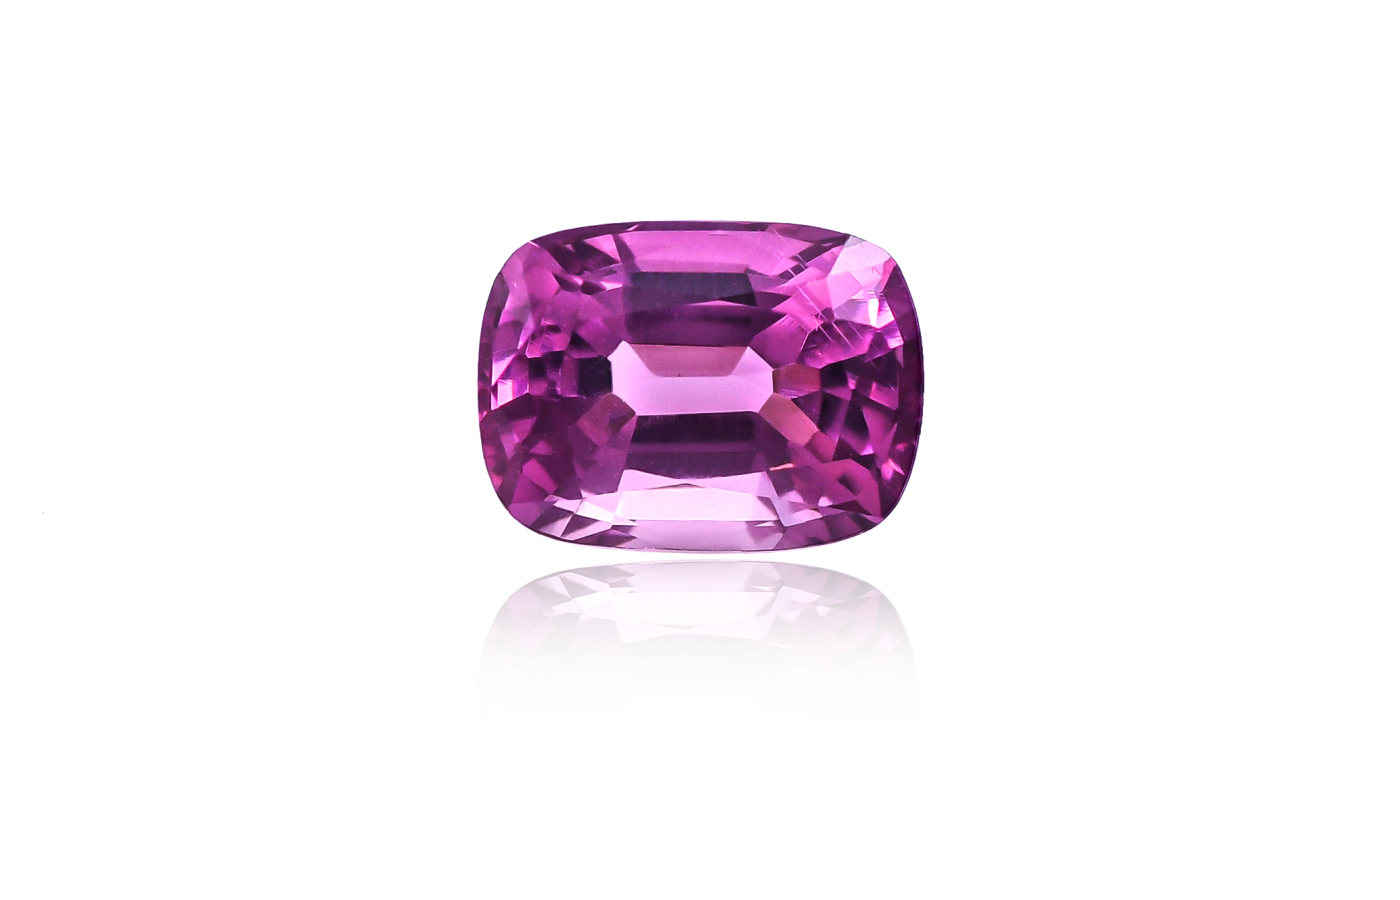 Minehaus mauve spinel of approximately 5-carats